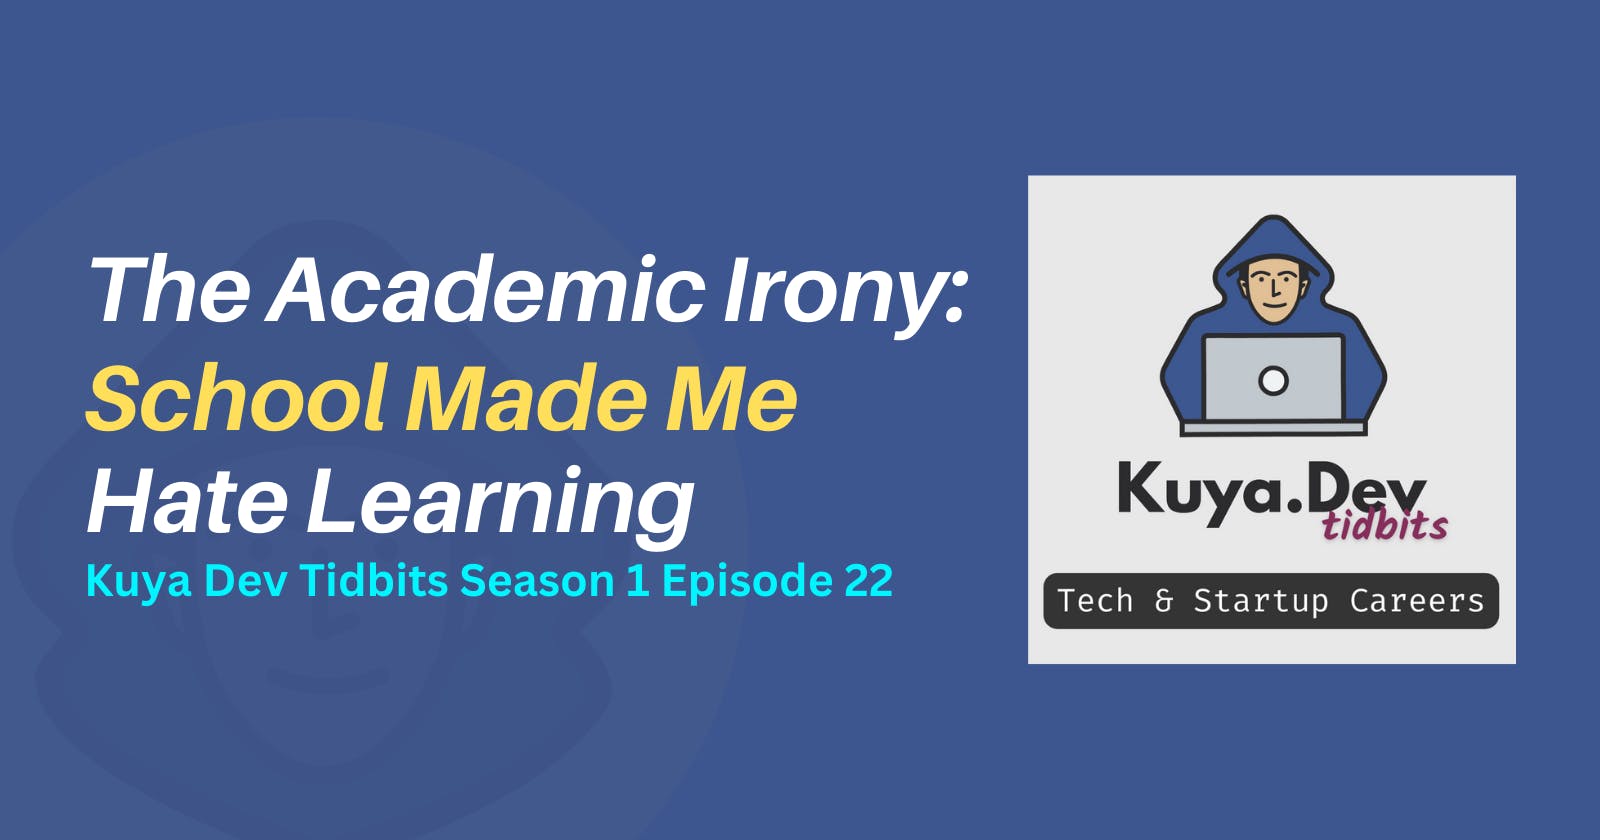 The Academic Irony: School Made Me Hate Learning